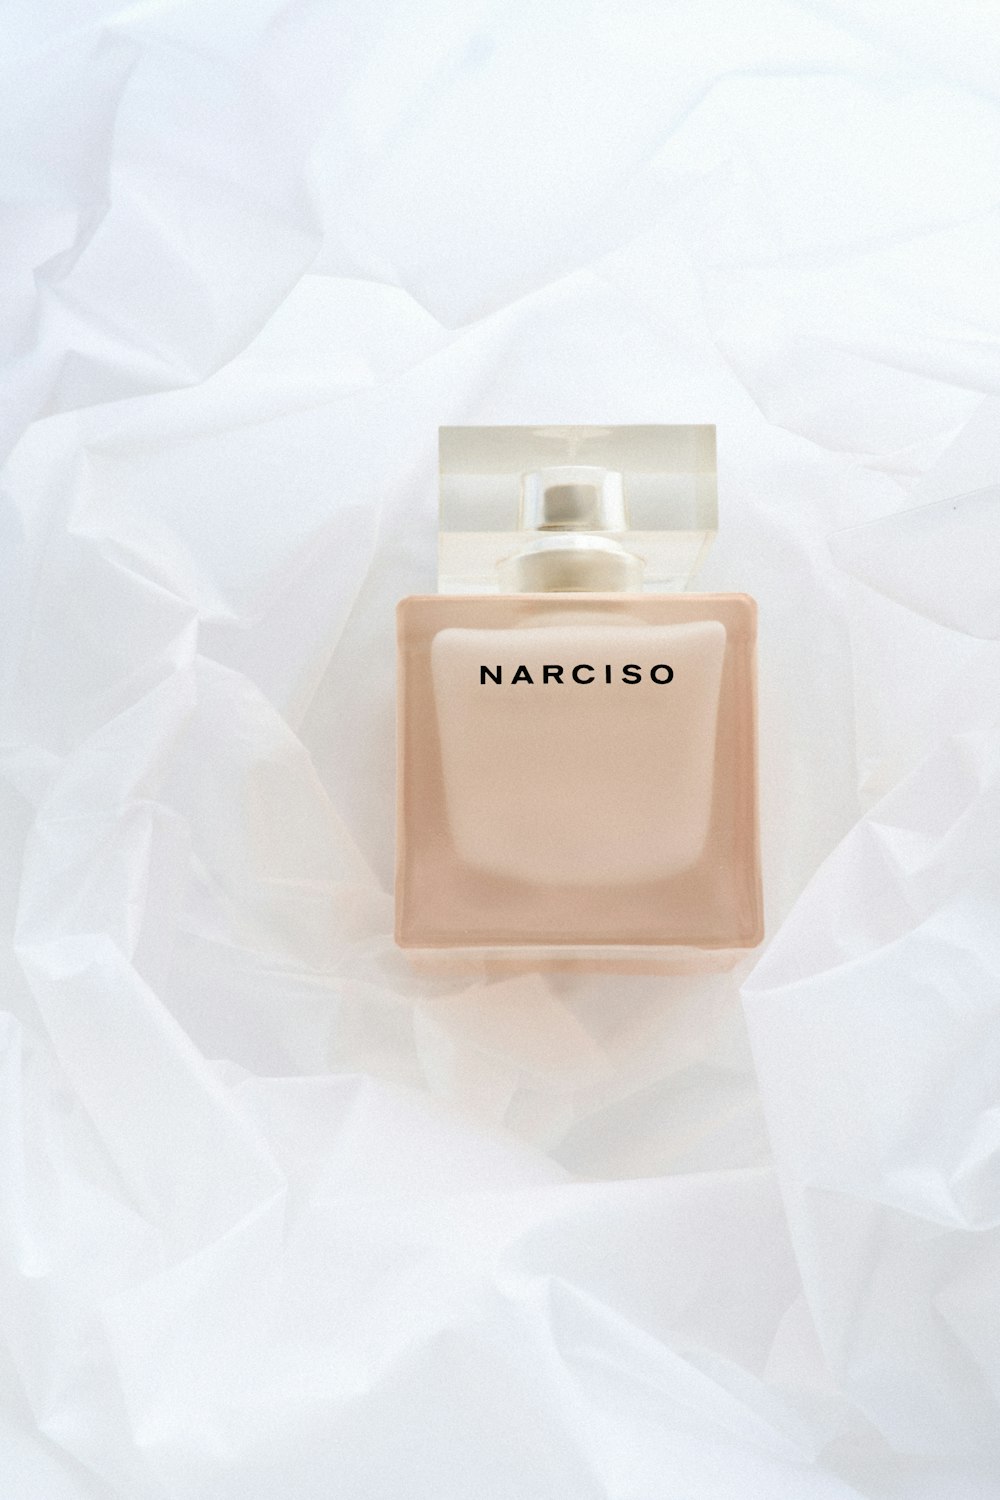 a bottle of narcicoo on a white sheet